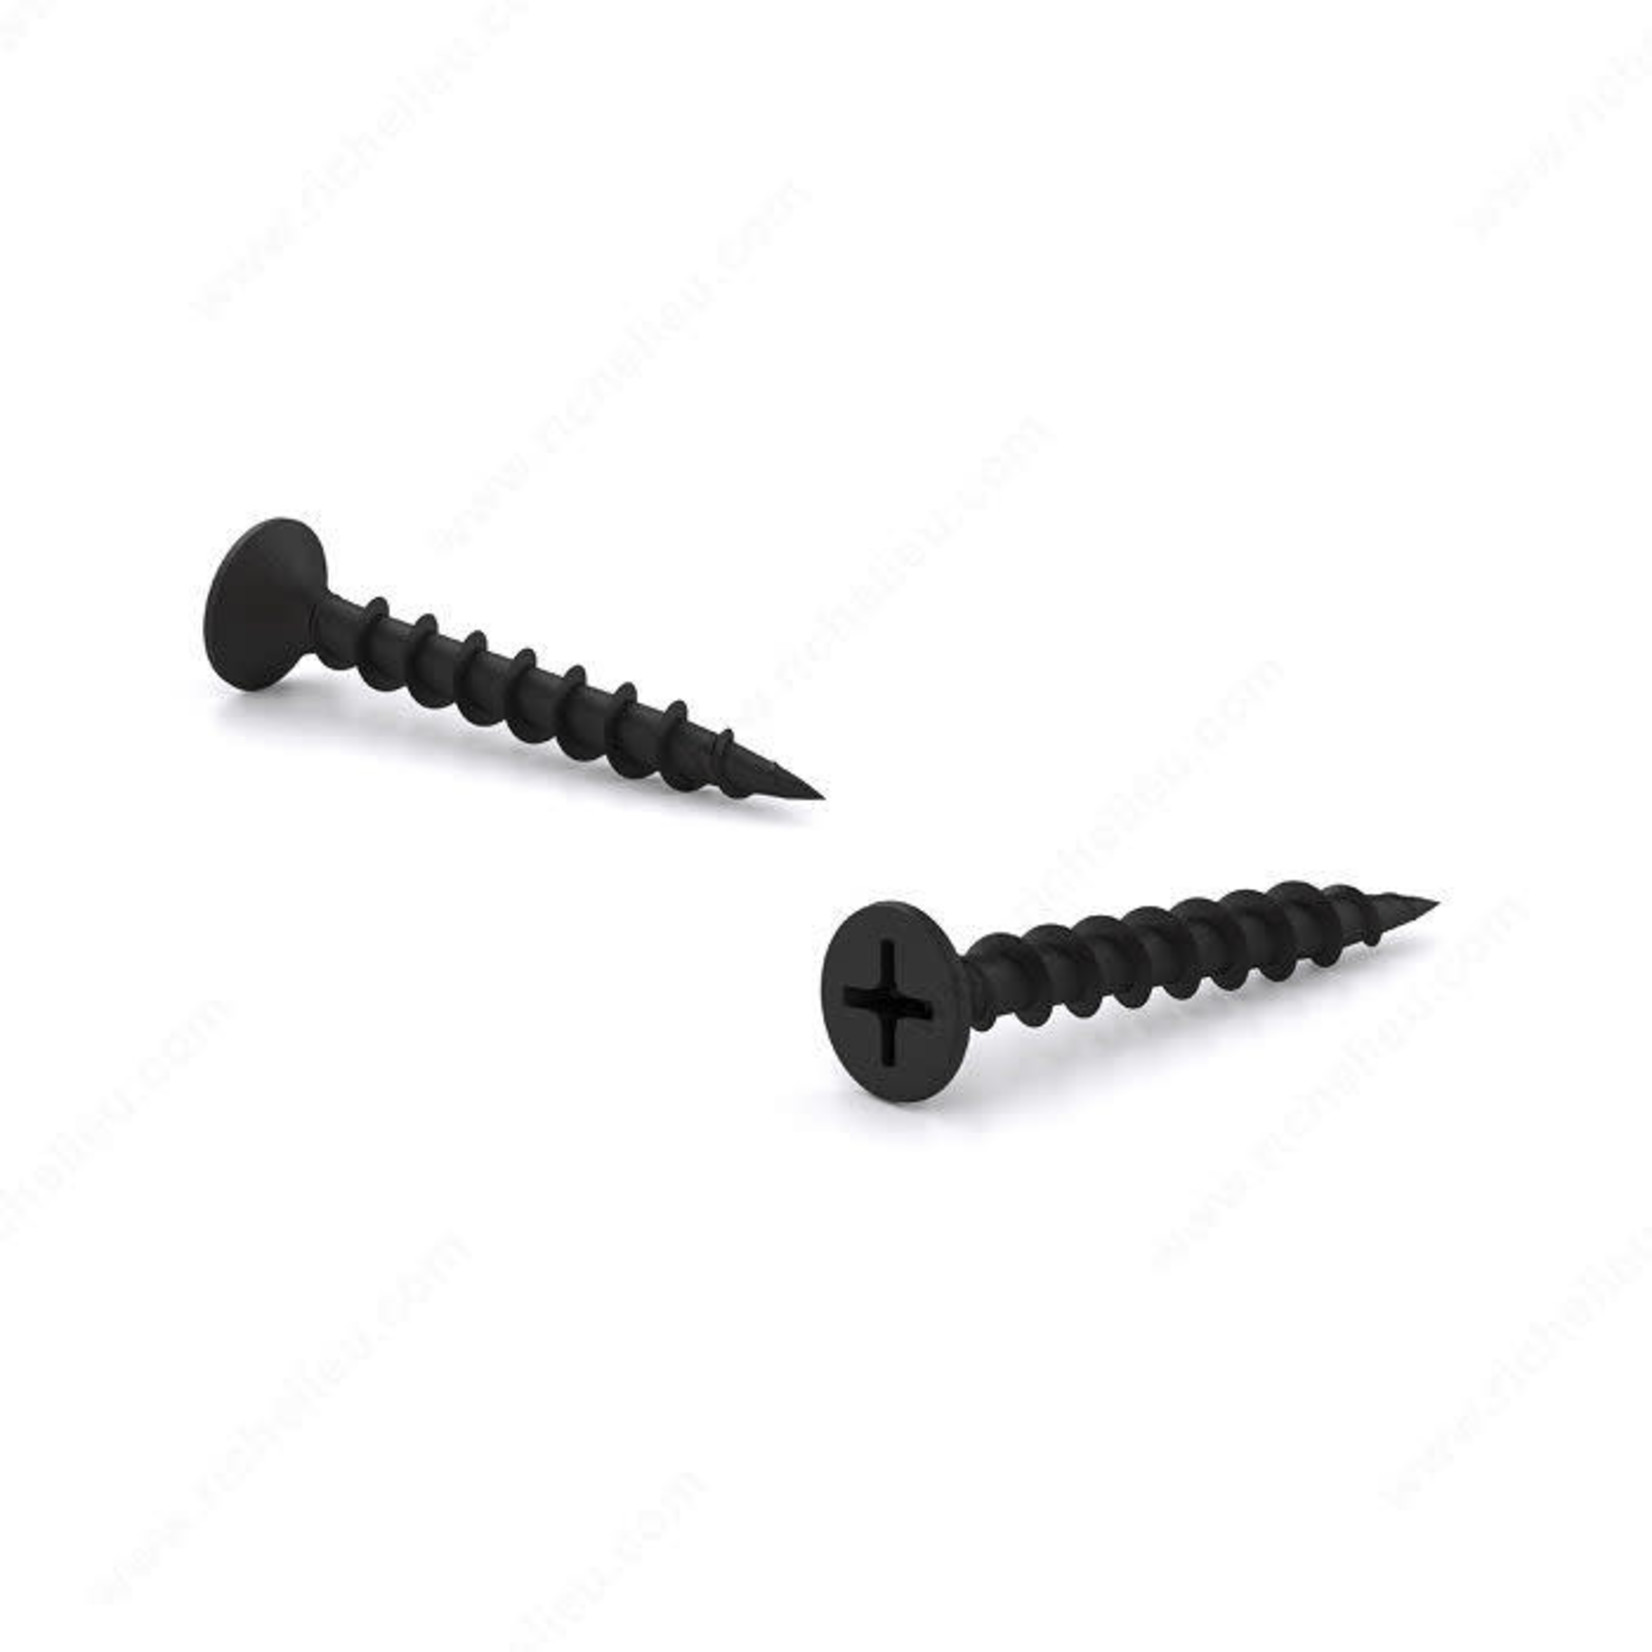 DRYWALL SCREW COURSE, #7 2-1/2IN, 2500PK